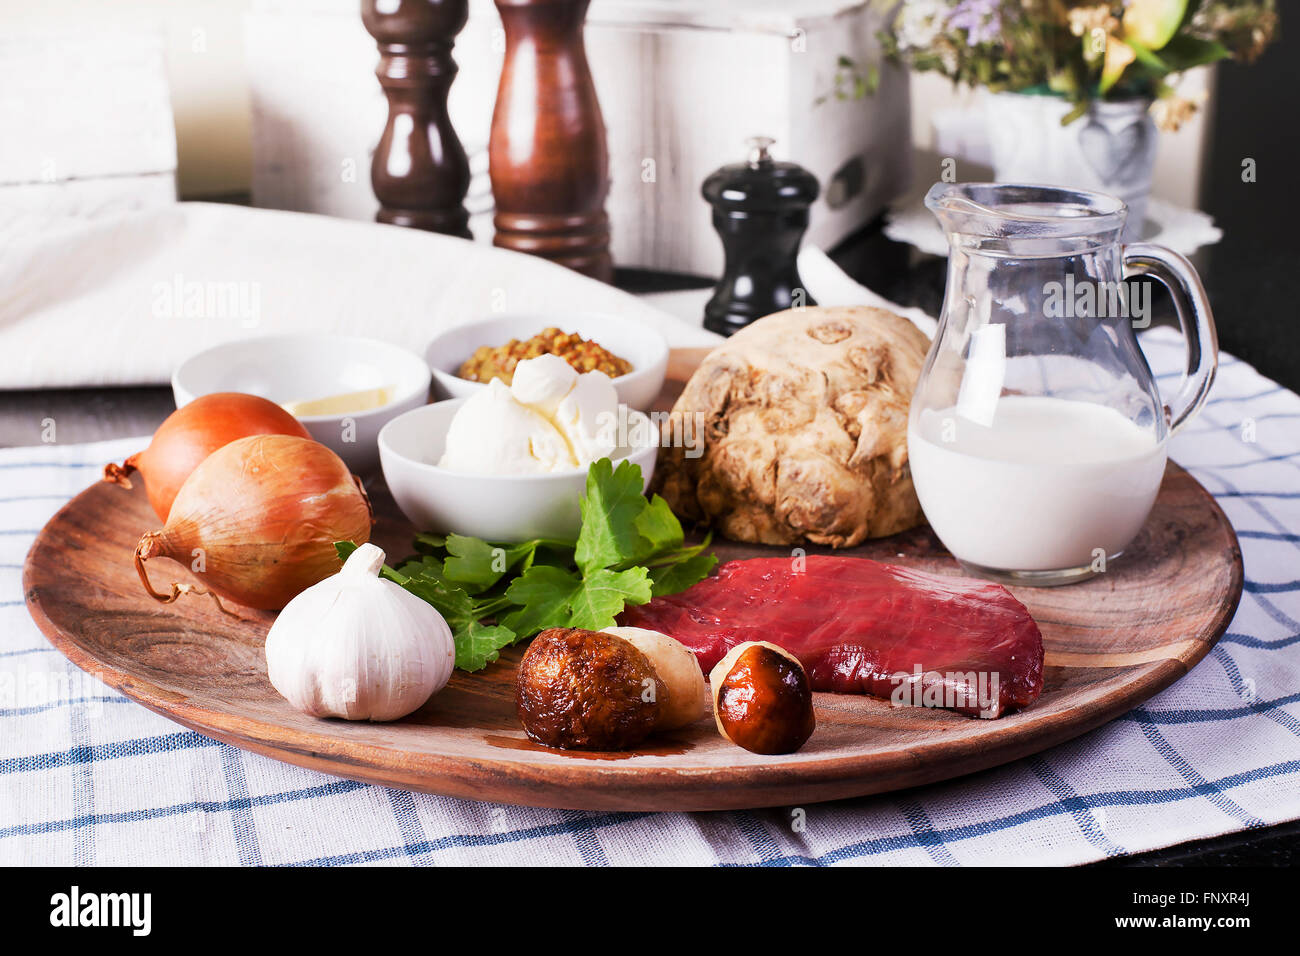 Assorted raw ingredients for Beef Stroganoff with mashed potatoes or celery - Stock image Stock Photo